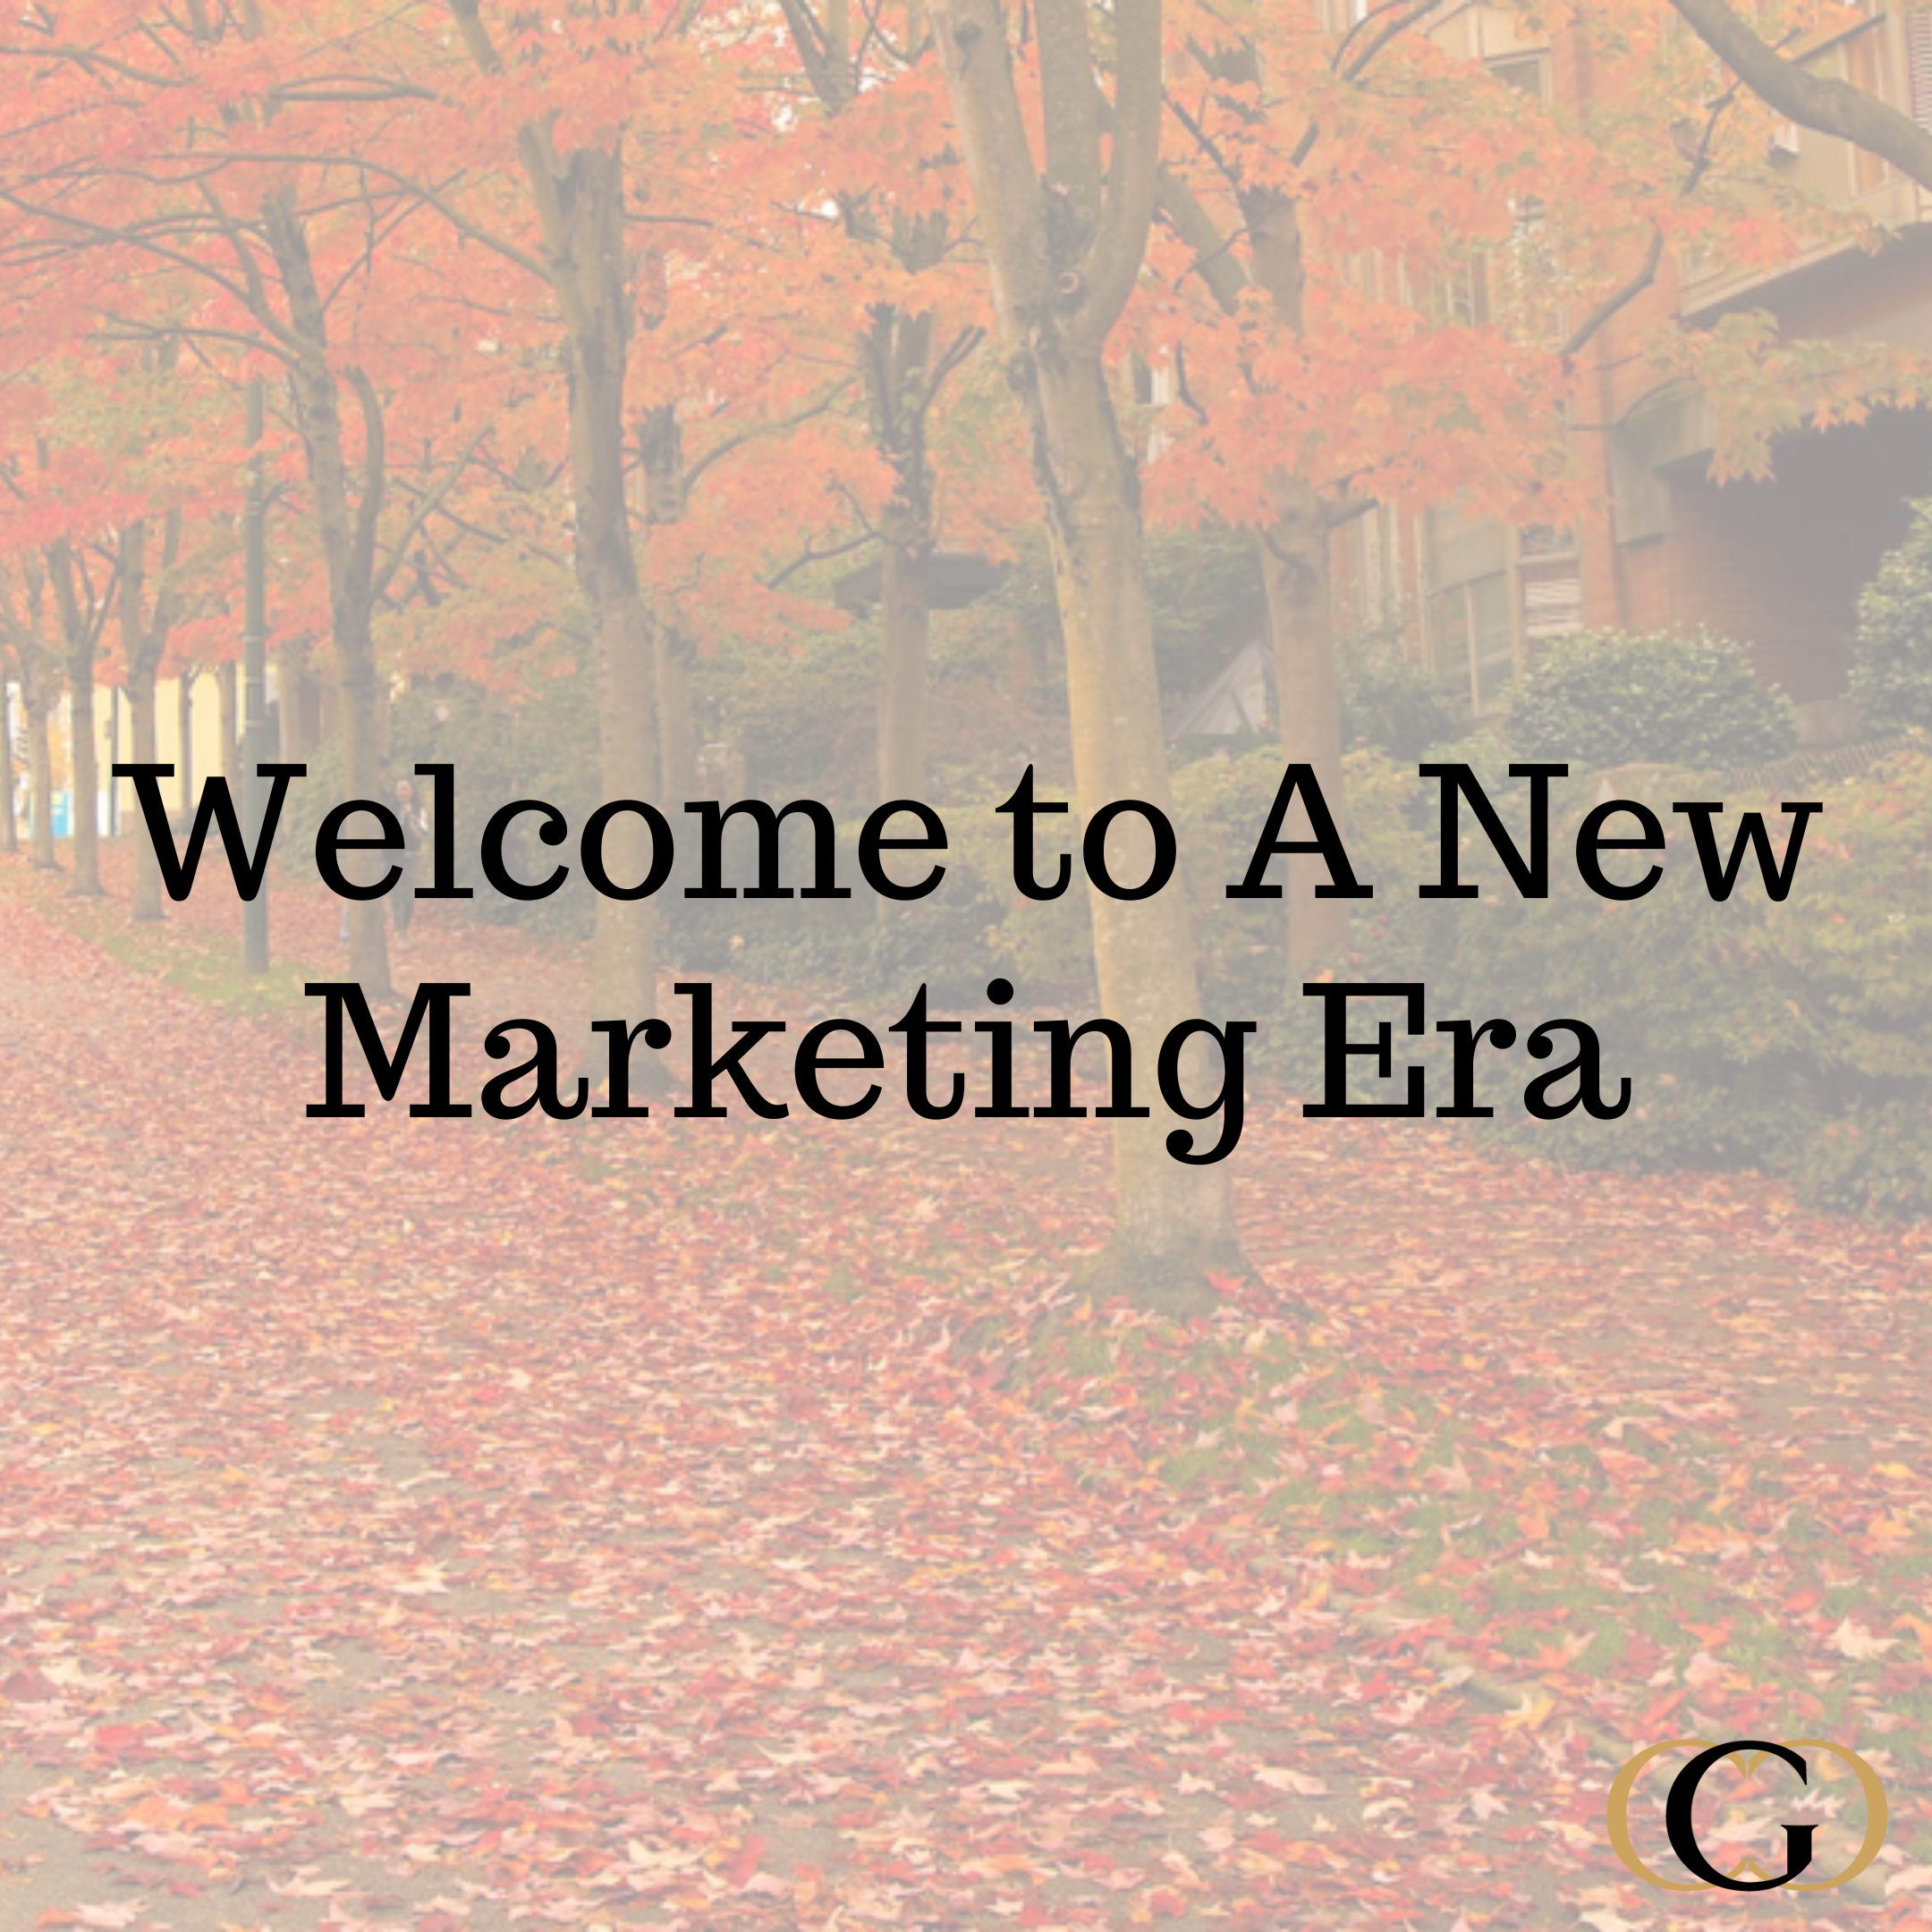 Welcome to a New Marketing Era